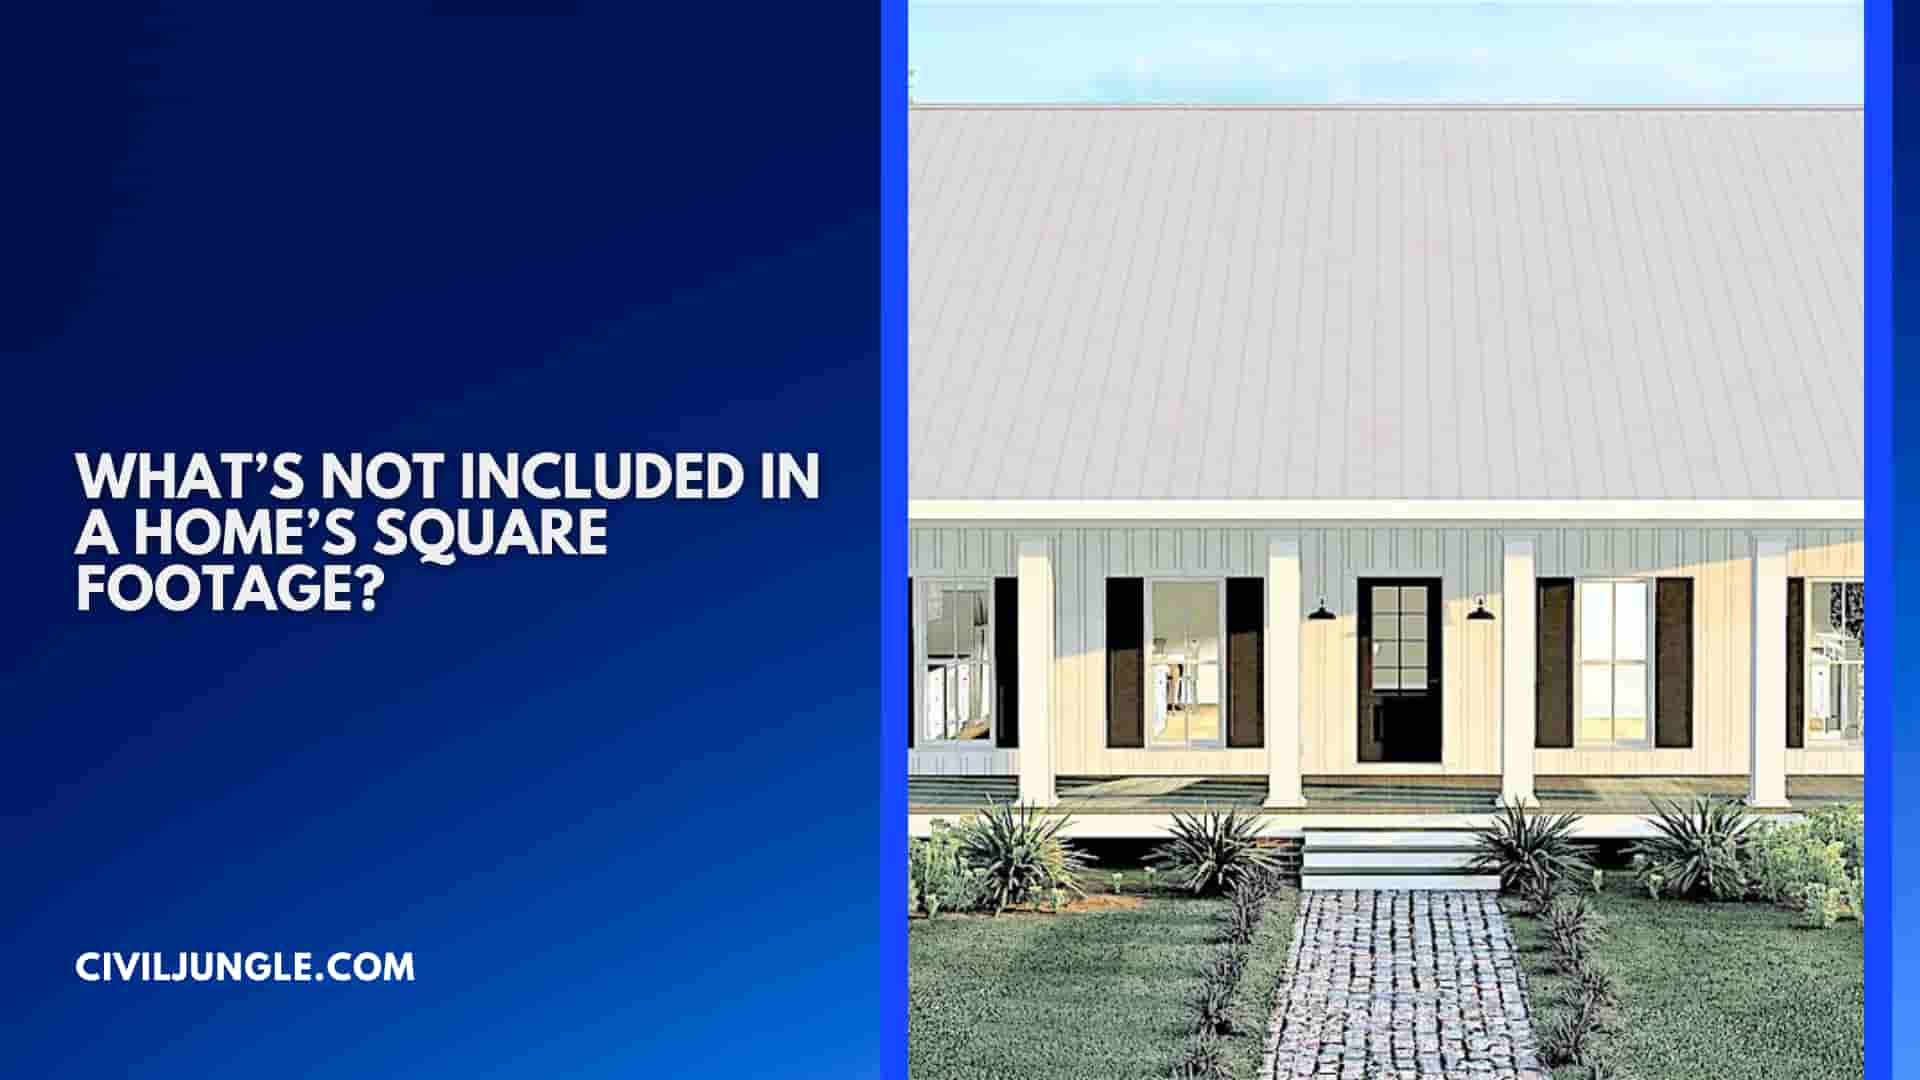 What’s Not Included in a Home’s Square Footage?